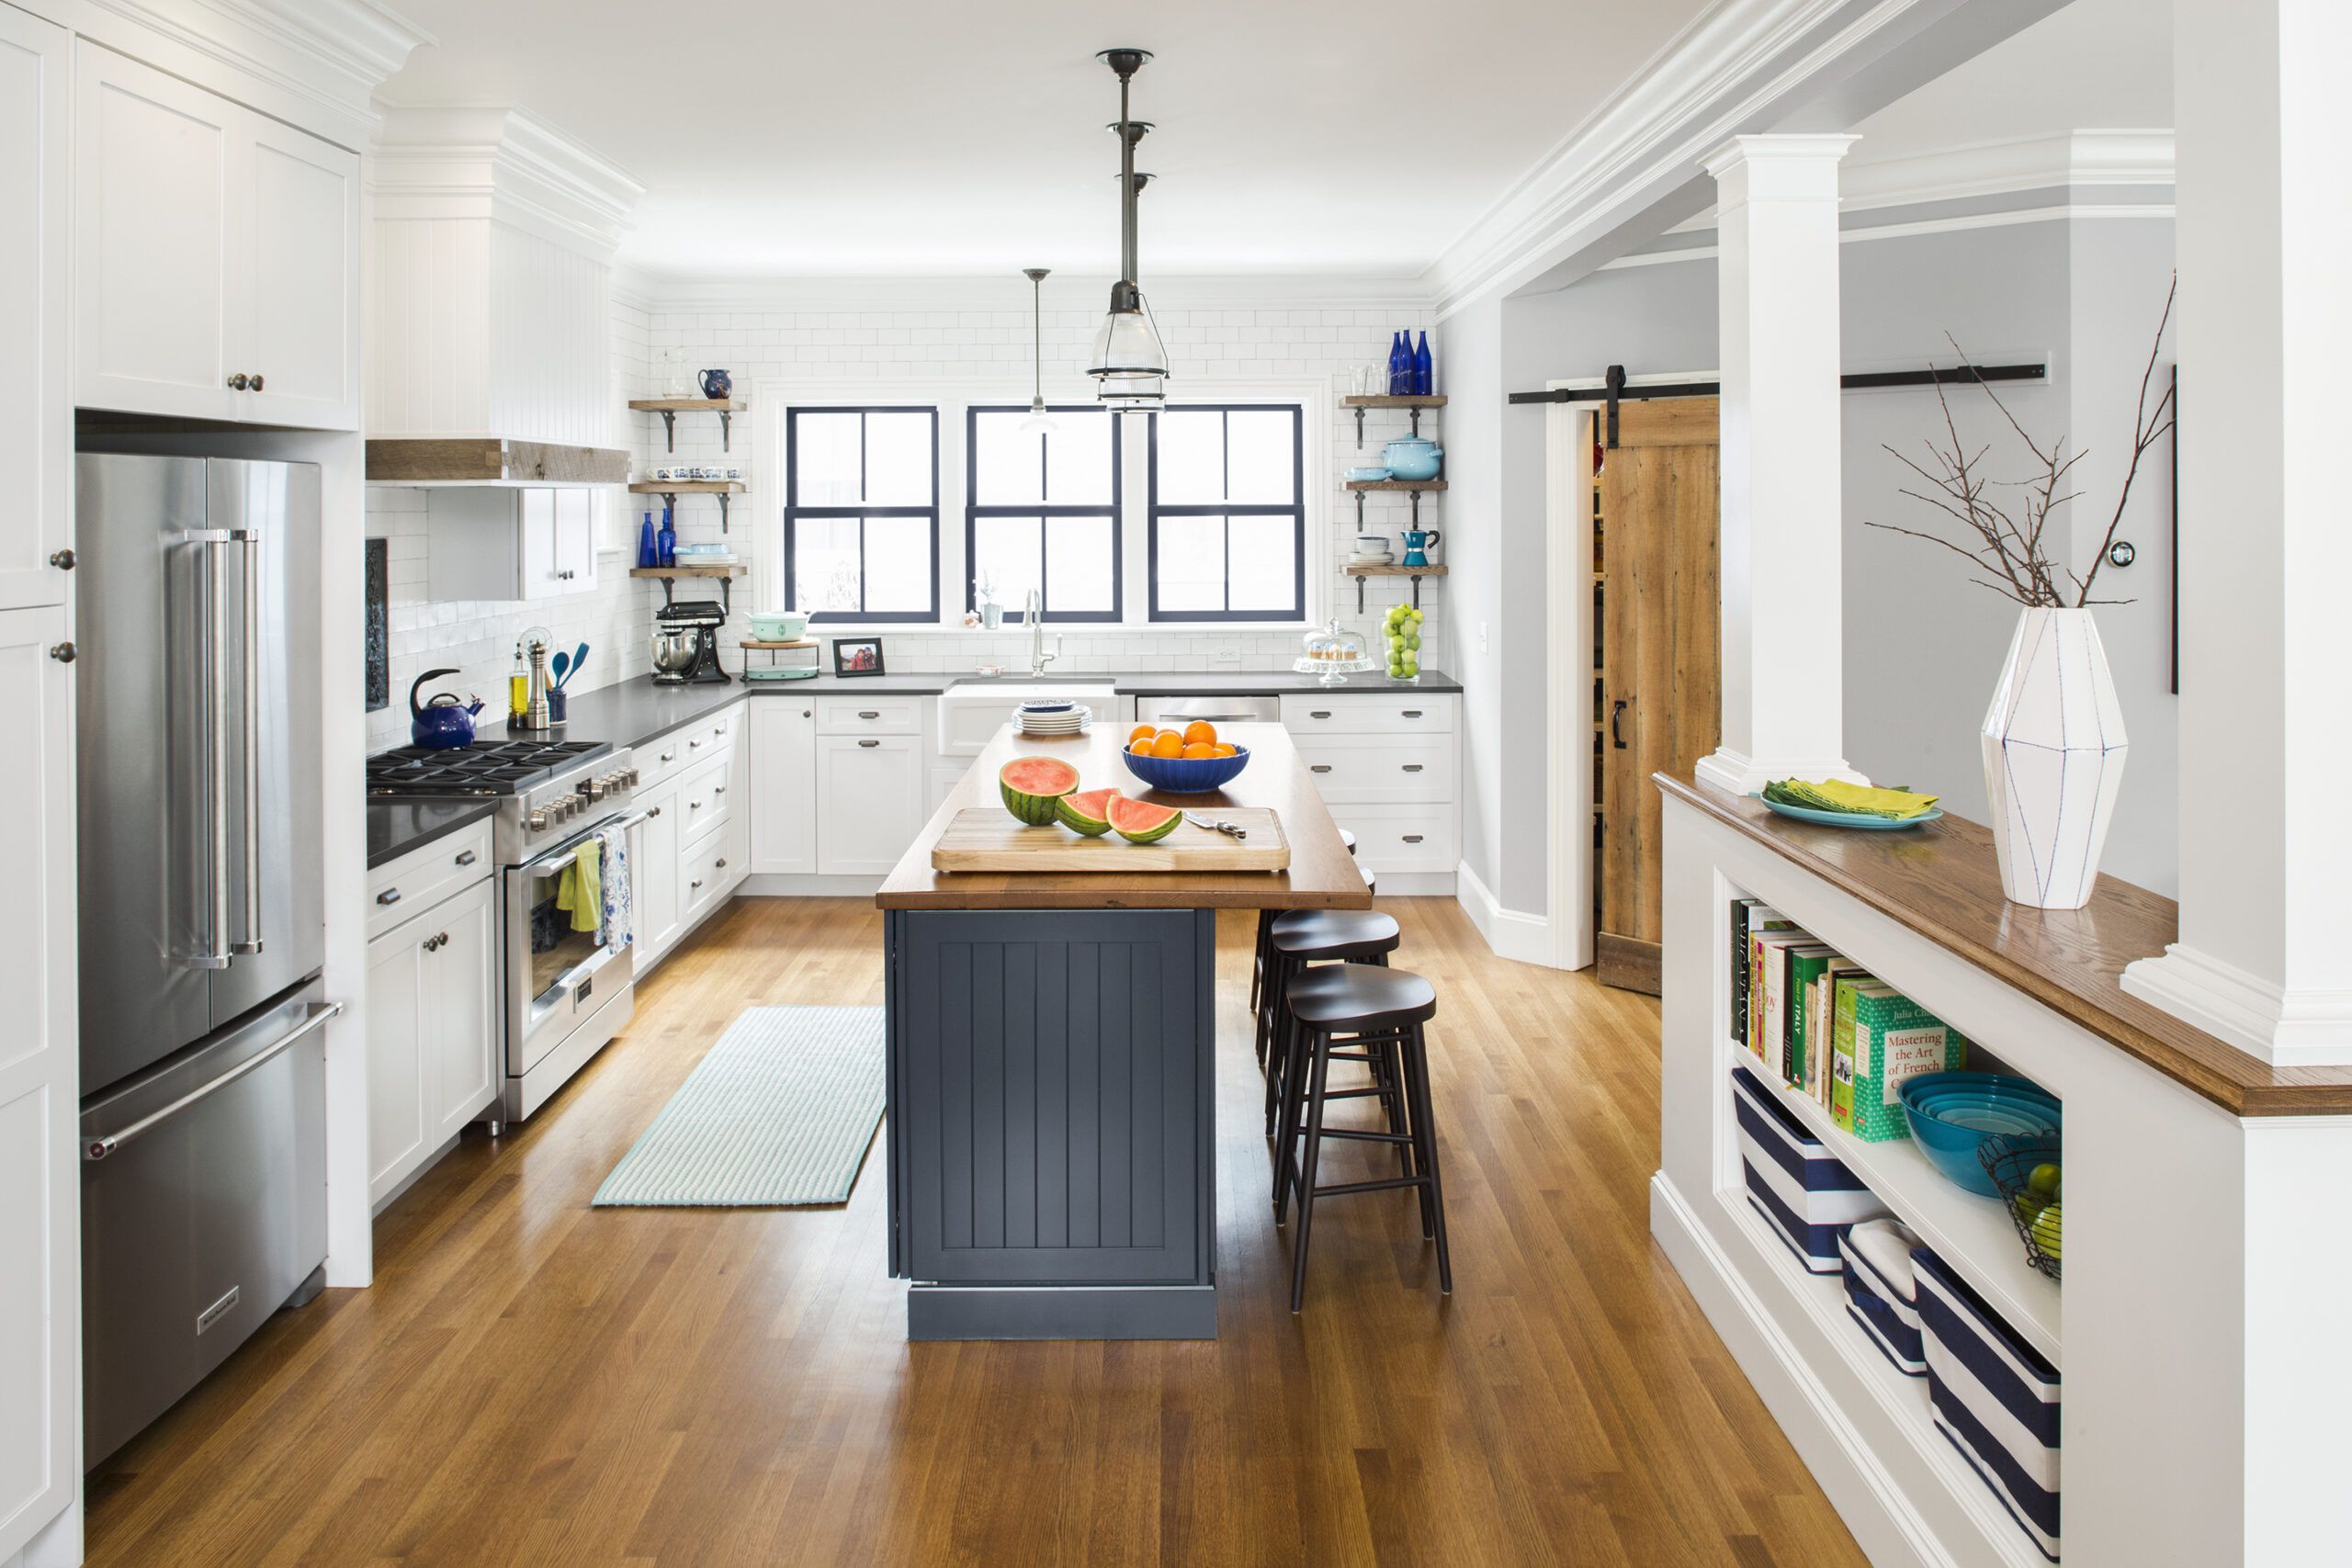 7 Reasons why kitchen remodeling makes a wise decision